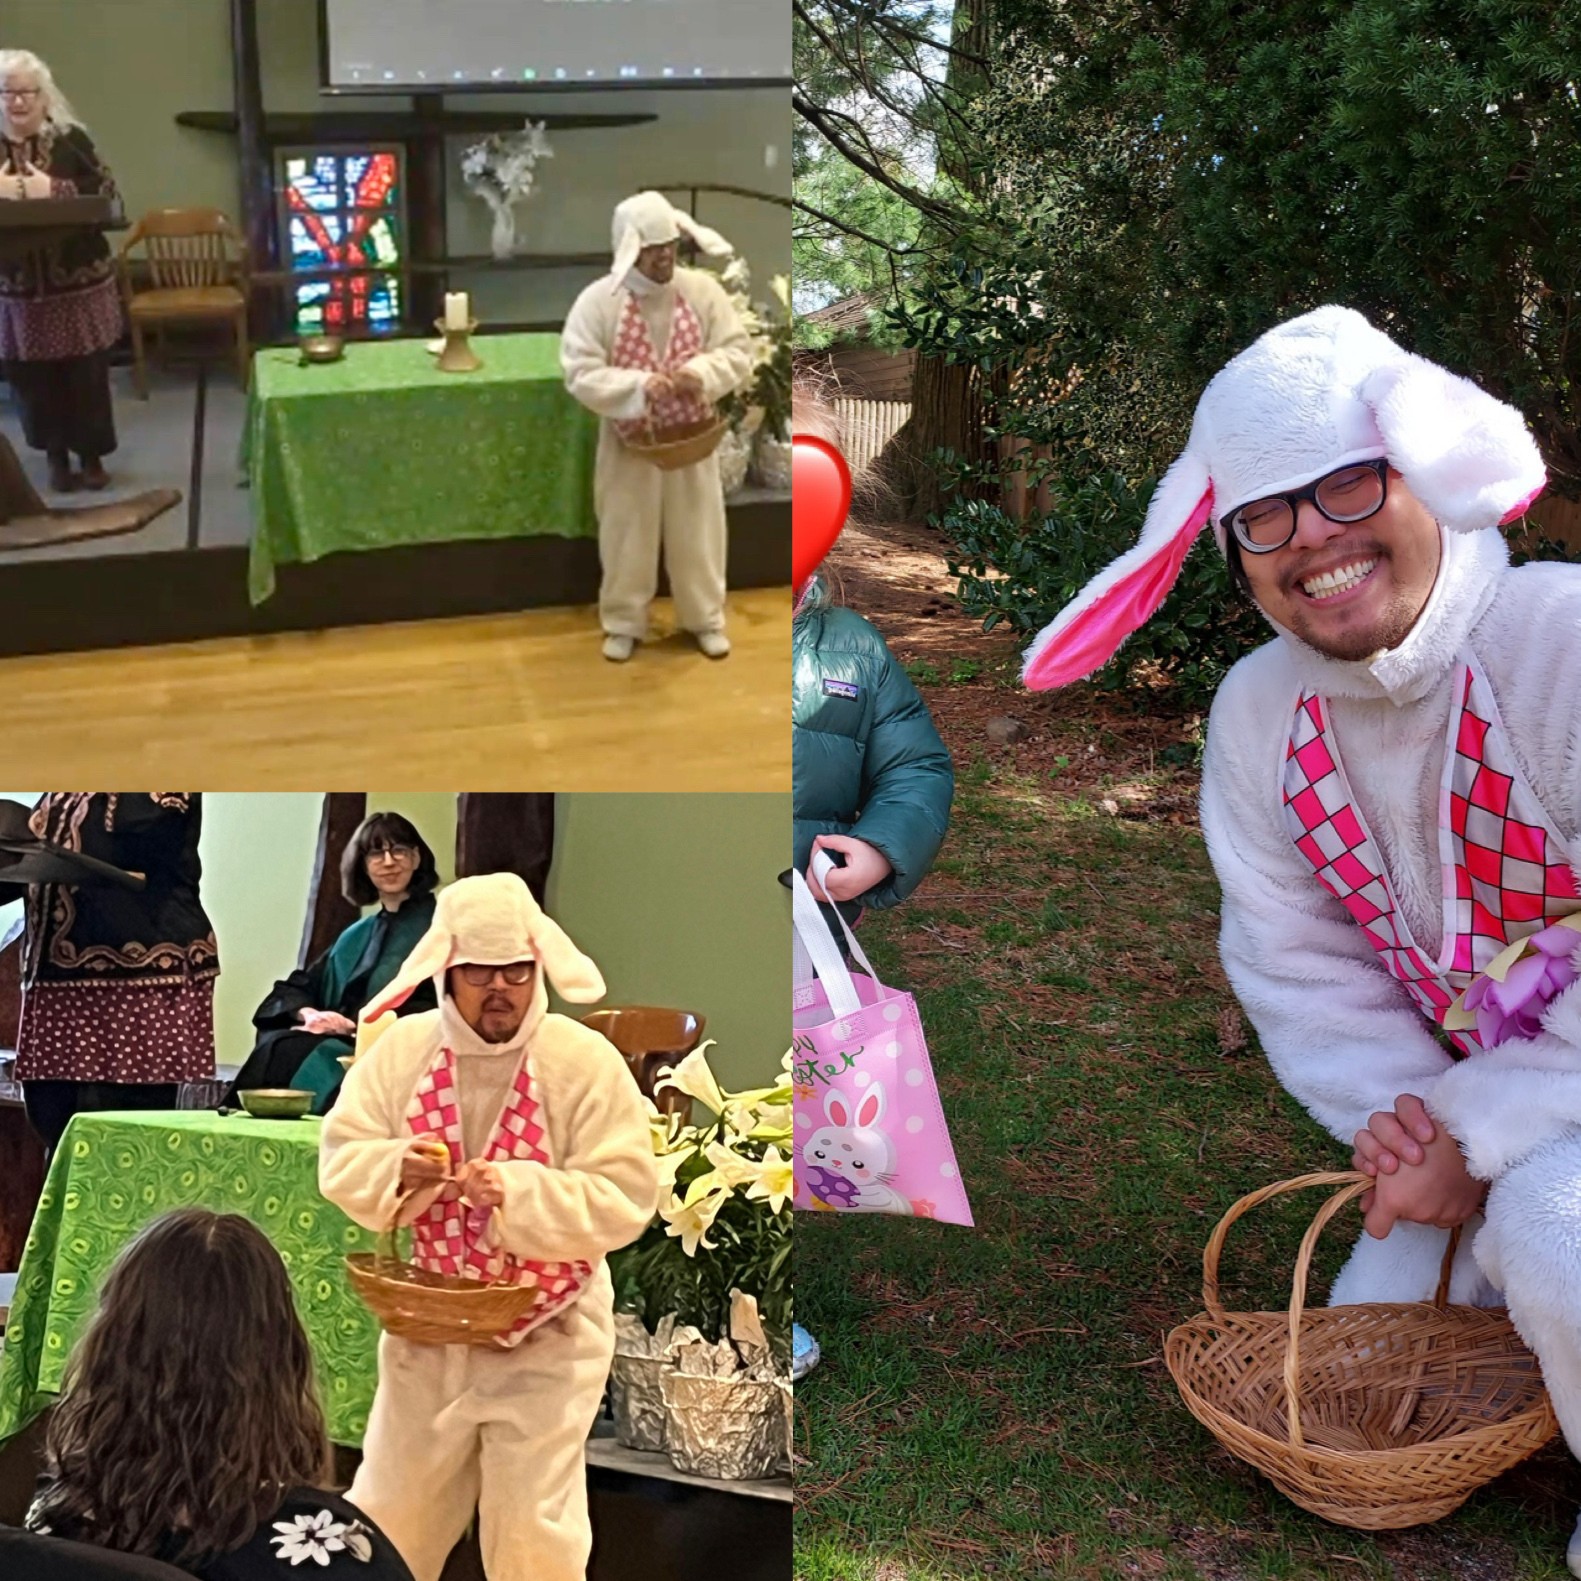 A man dressed in a white bunny costume with glasses is participating in an Easter egg hunt at a Unitarian service